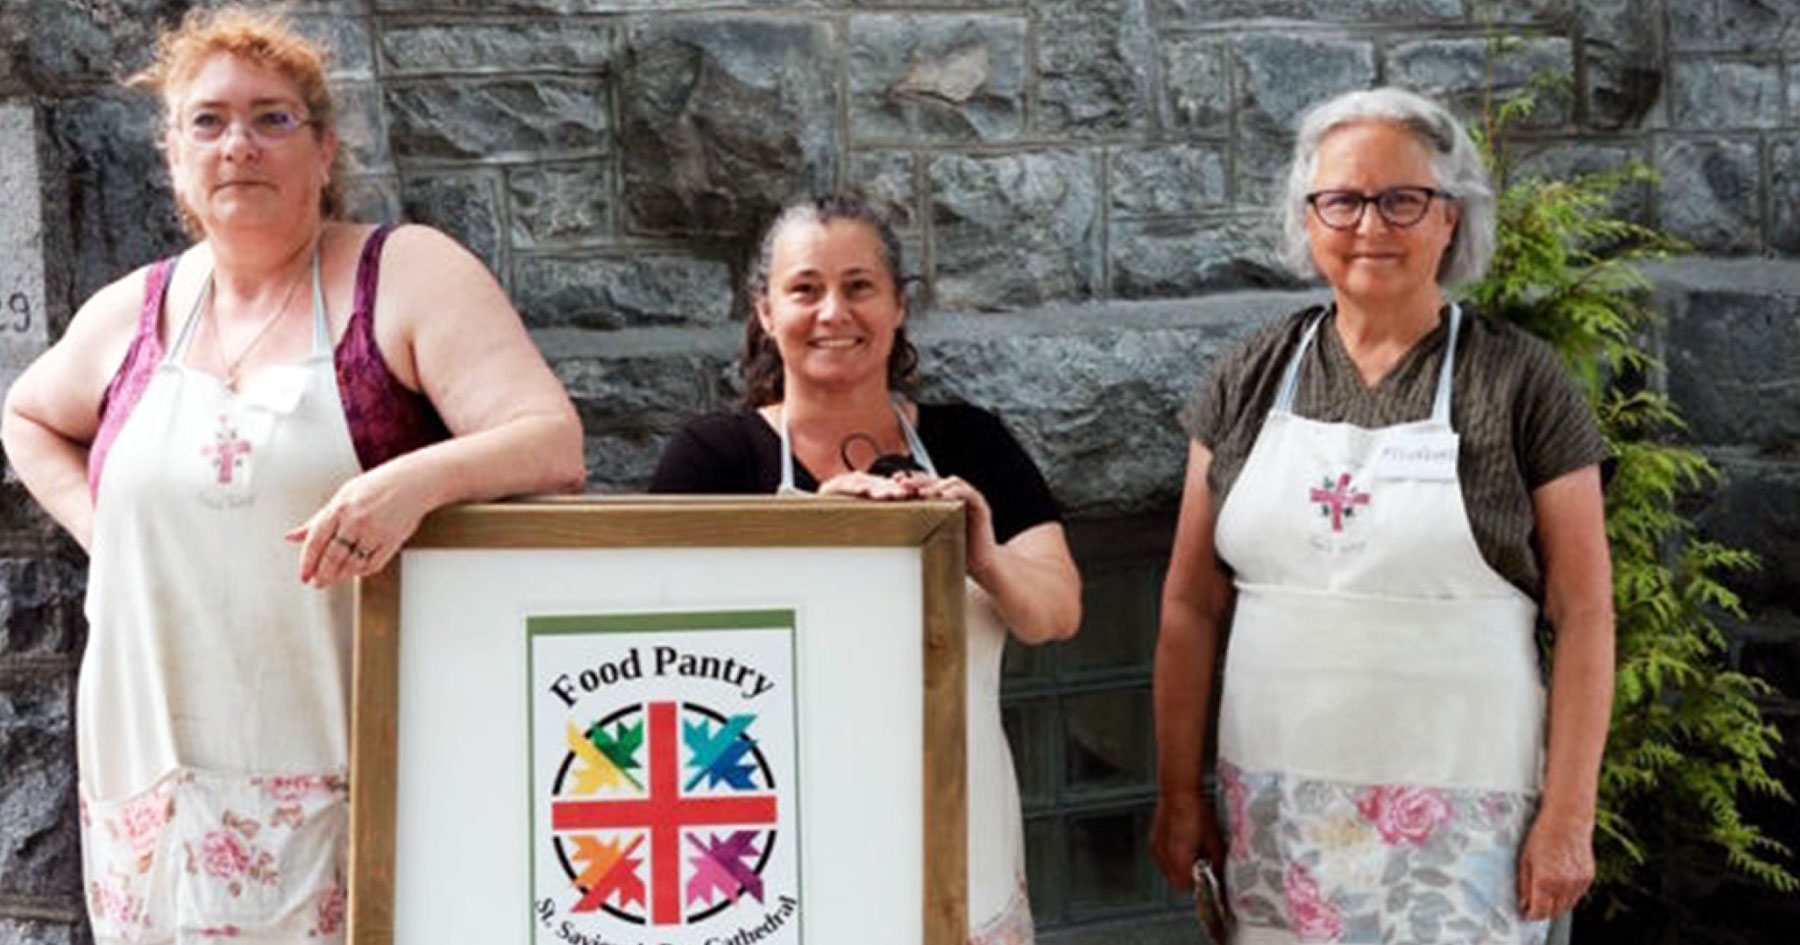 At the St Saviour’s Anglican Food Pantry, (L-R) volunteer food bank manager Nora Nitz with volunteers Cindy Gimness and Susan Warren. Photograph: Bill Metcalfe